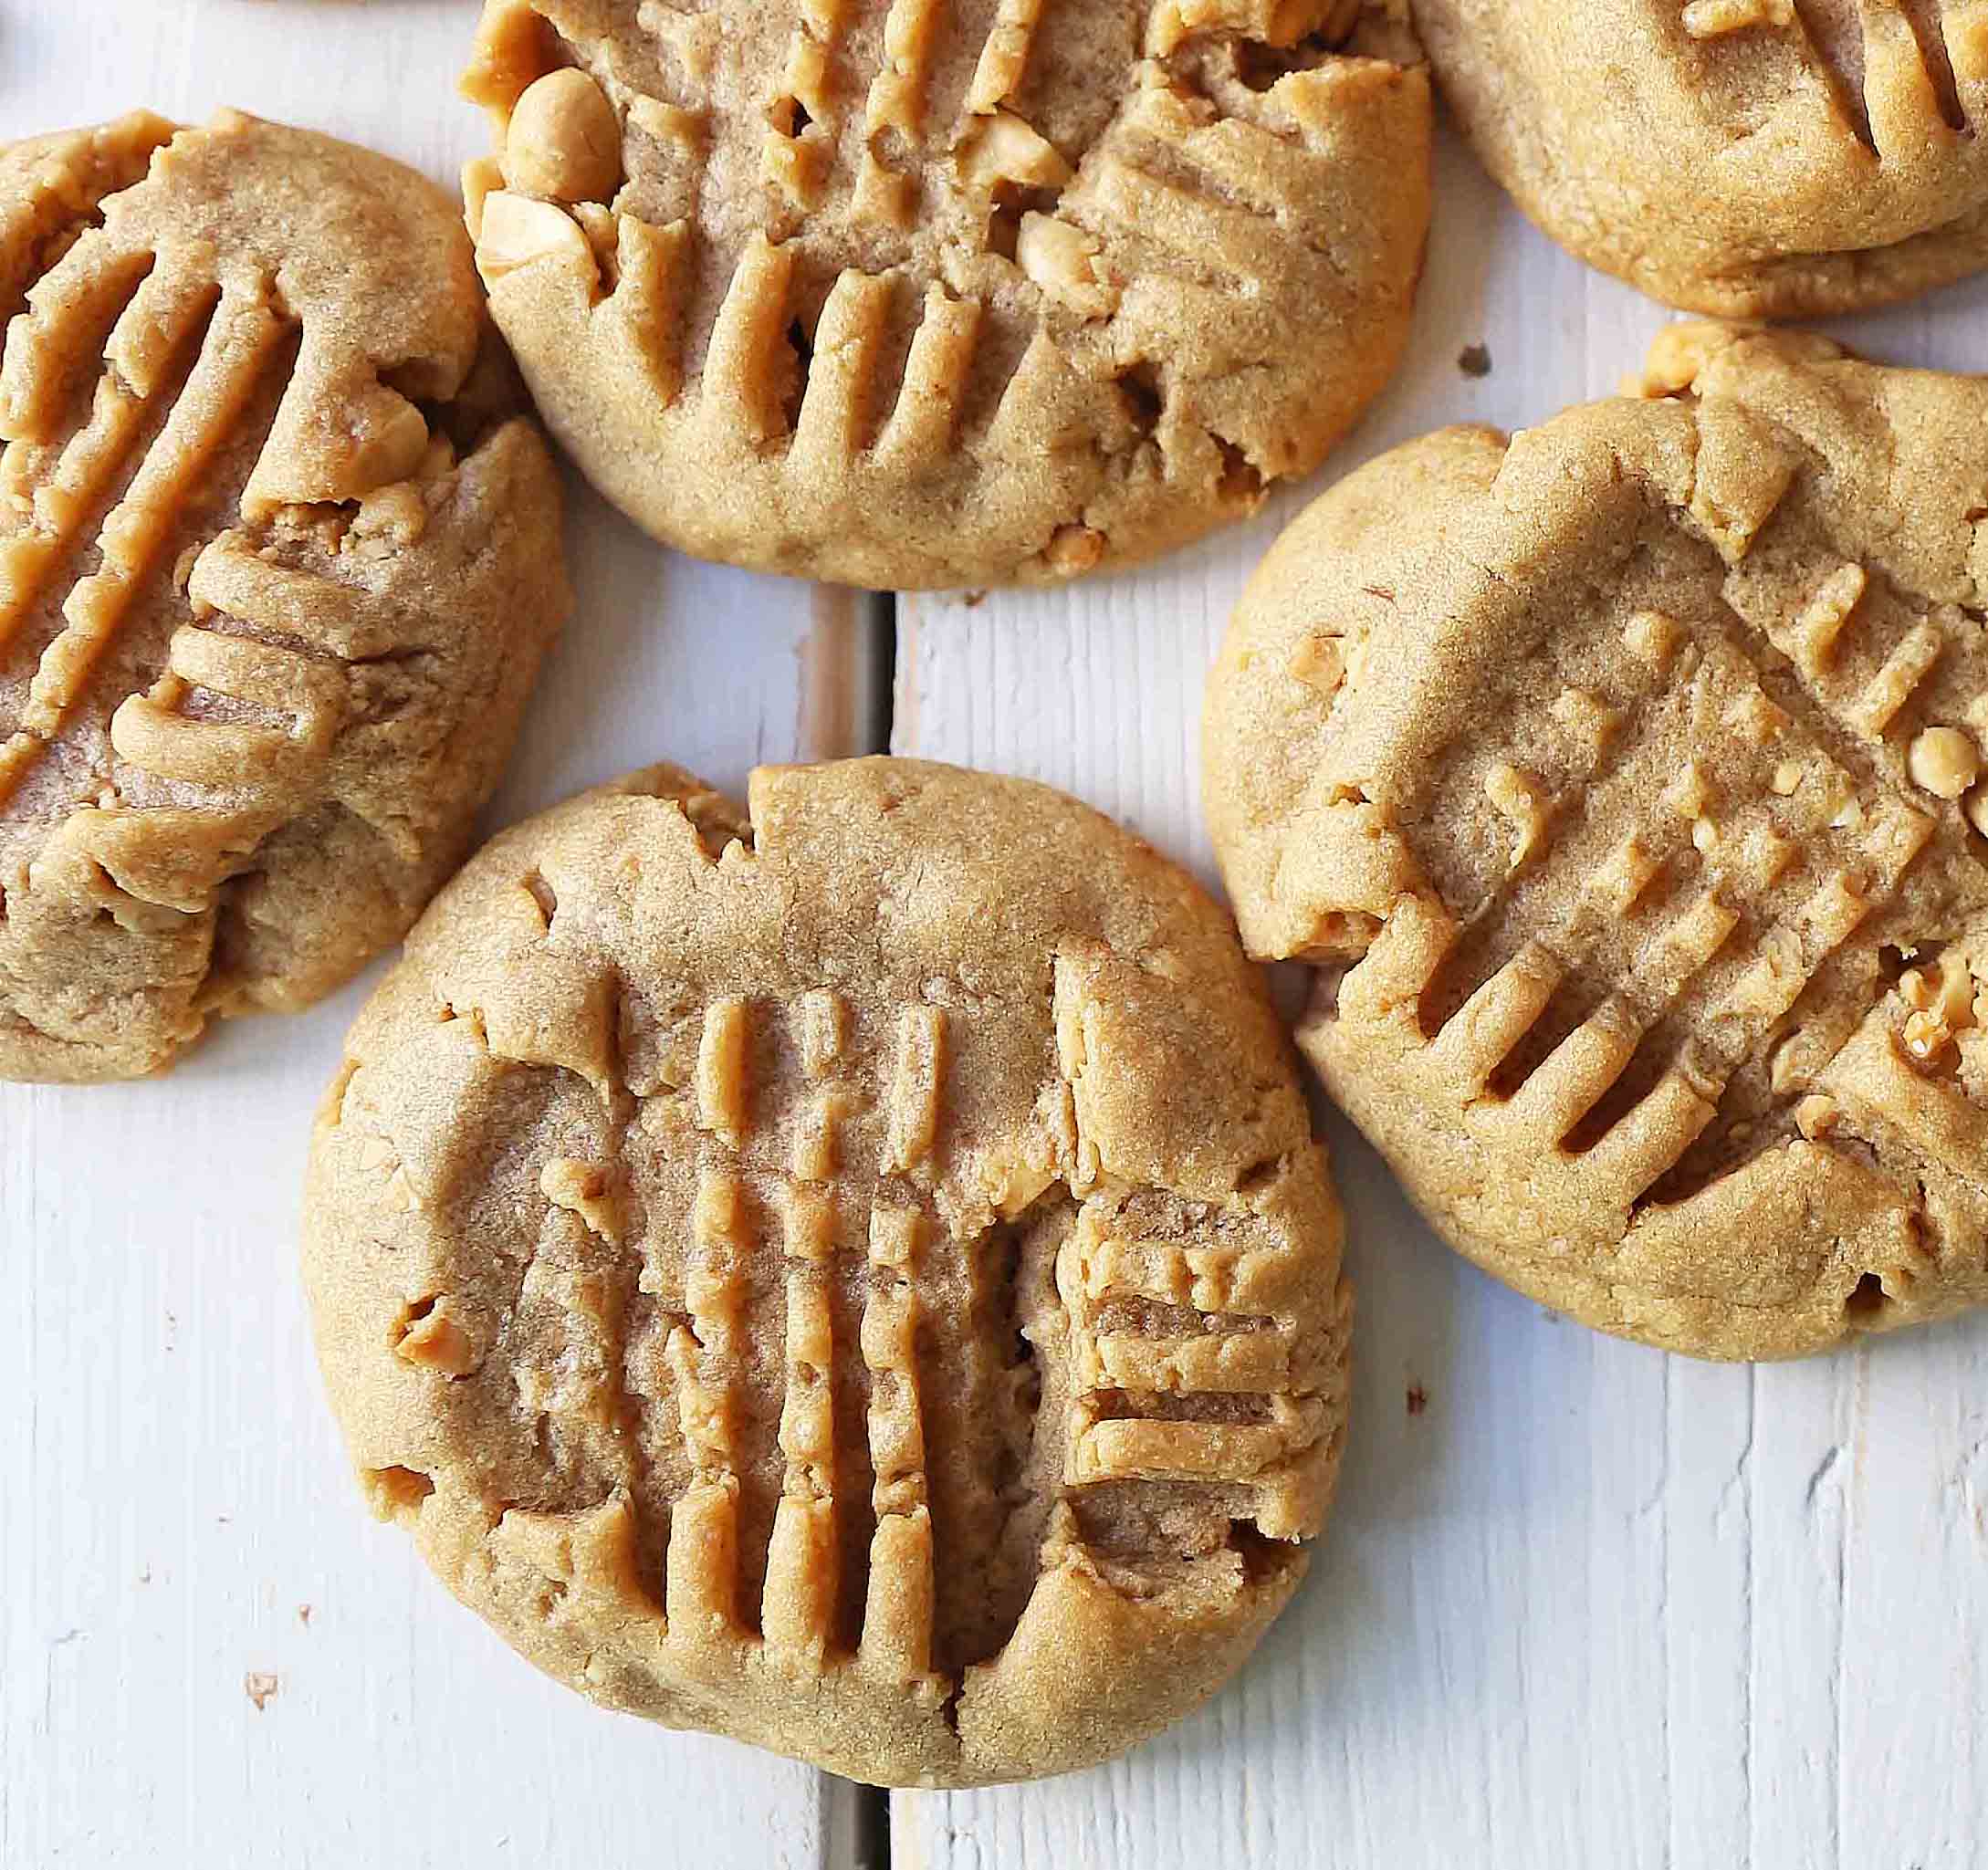 Soft Chewy Peanut Butter Cookies. How to make the perfect peanut butter cookie. www.modernhoney.com #peanutbutter #peanutbuttercookies #softpeanutbuttercookies #chewypeanutbuttercookies 